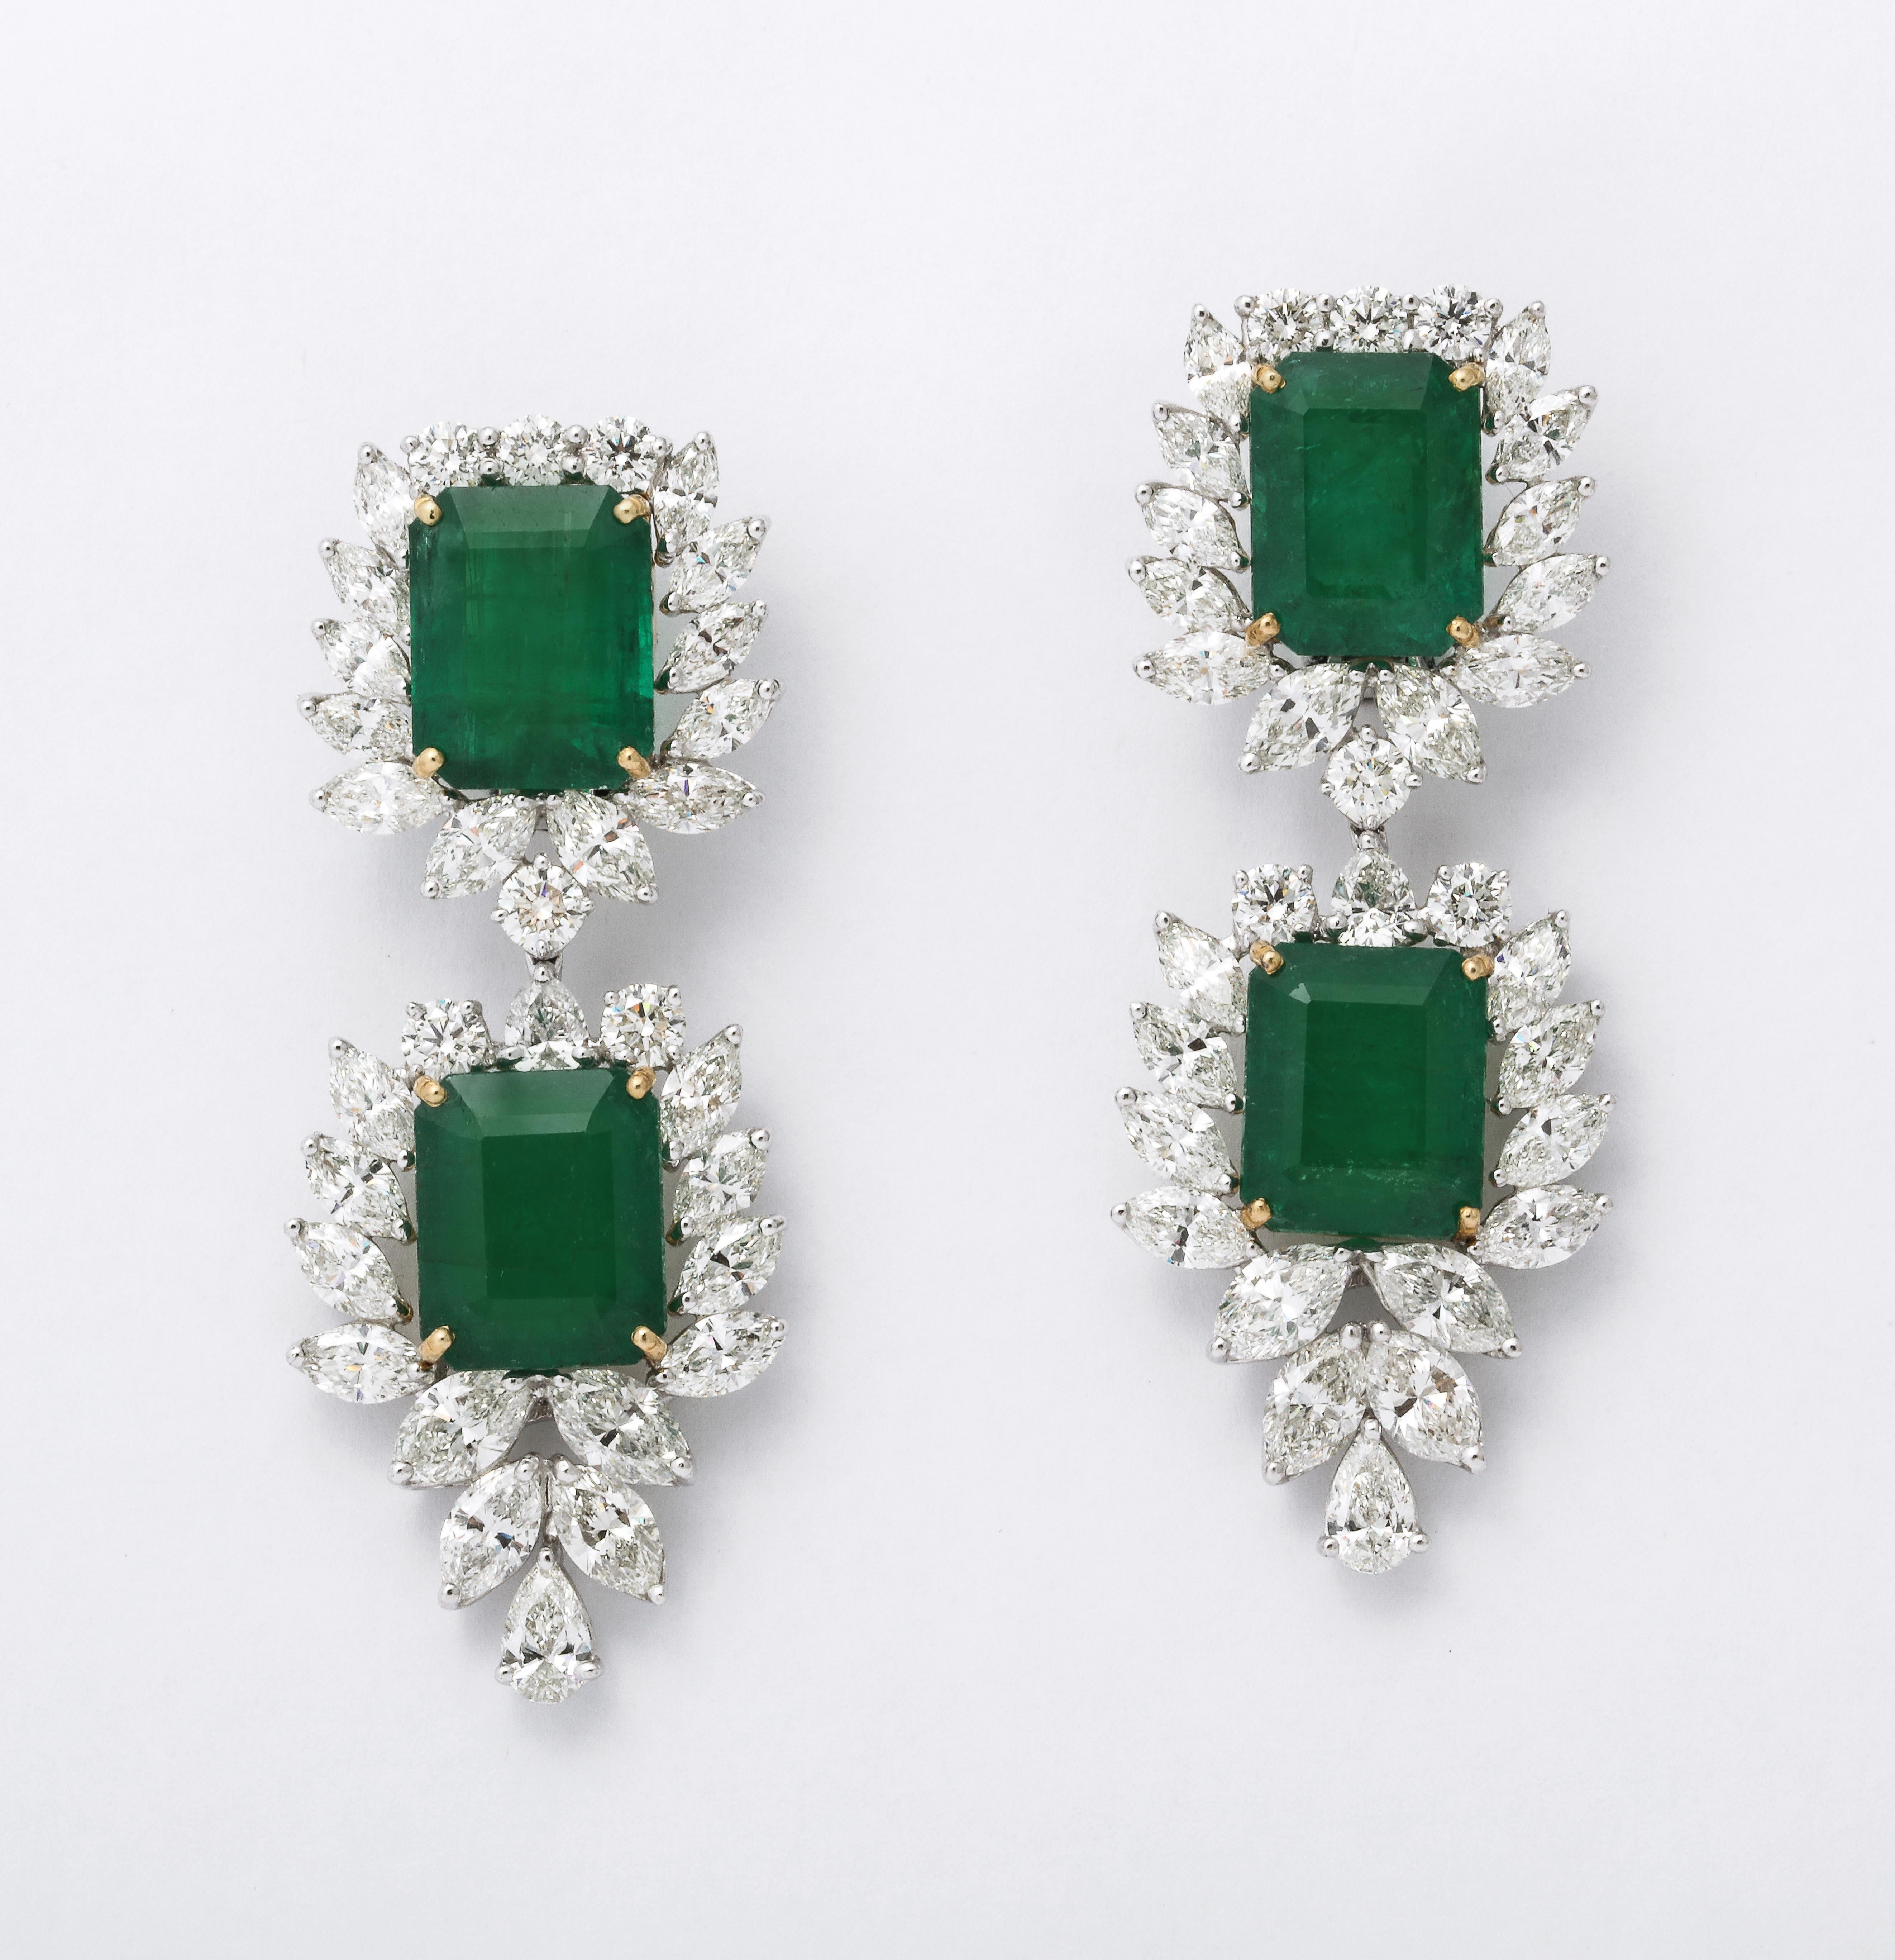 
An important pair of beautiful Emerald and Diamond Drop Earrings. 

38.09 carats of fine emerald cut green Emeralds.

22.10 carats of white pear shape, marquise and round brilliant cut diamonds. 

Set in platinum and 18k yellow gold.